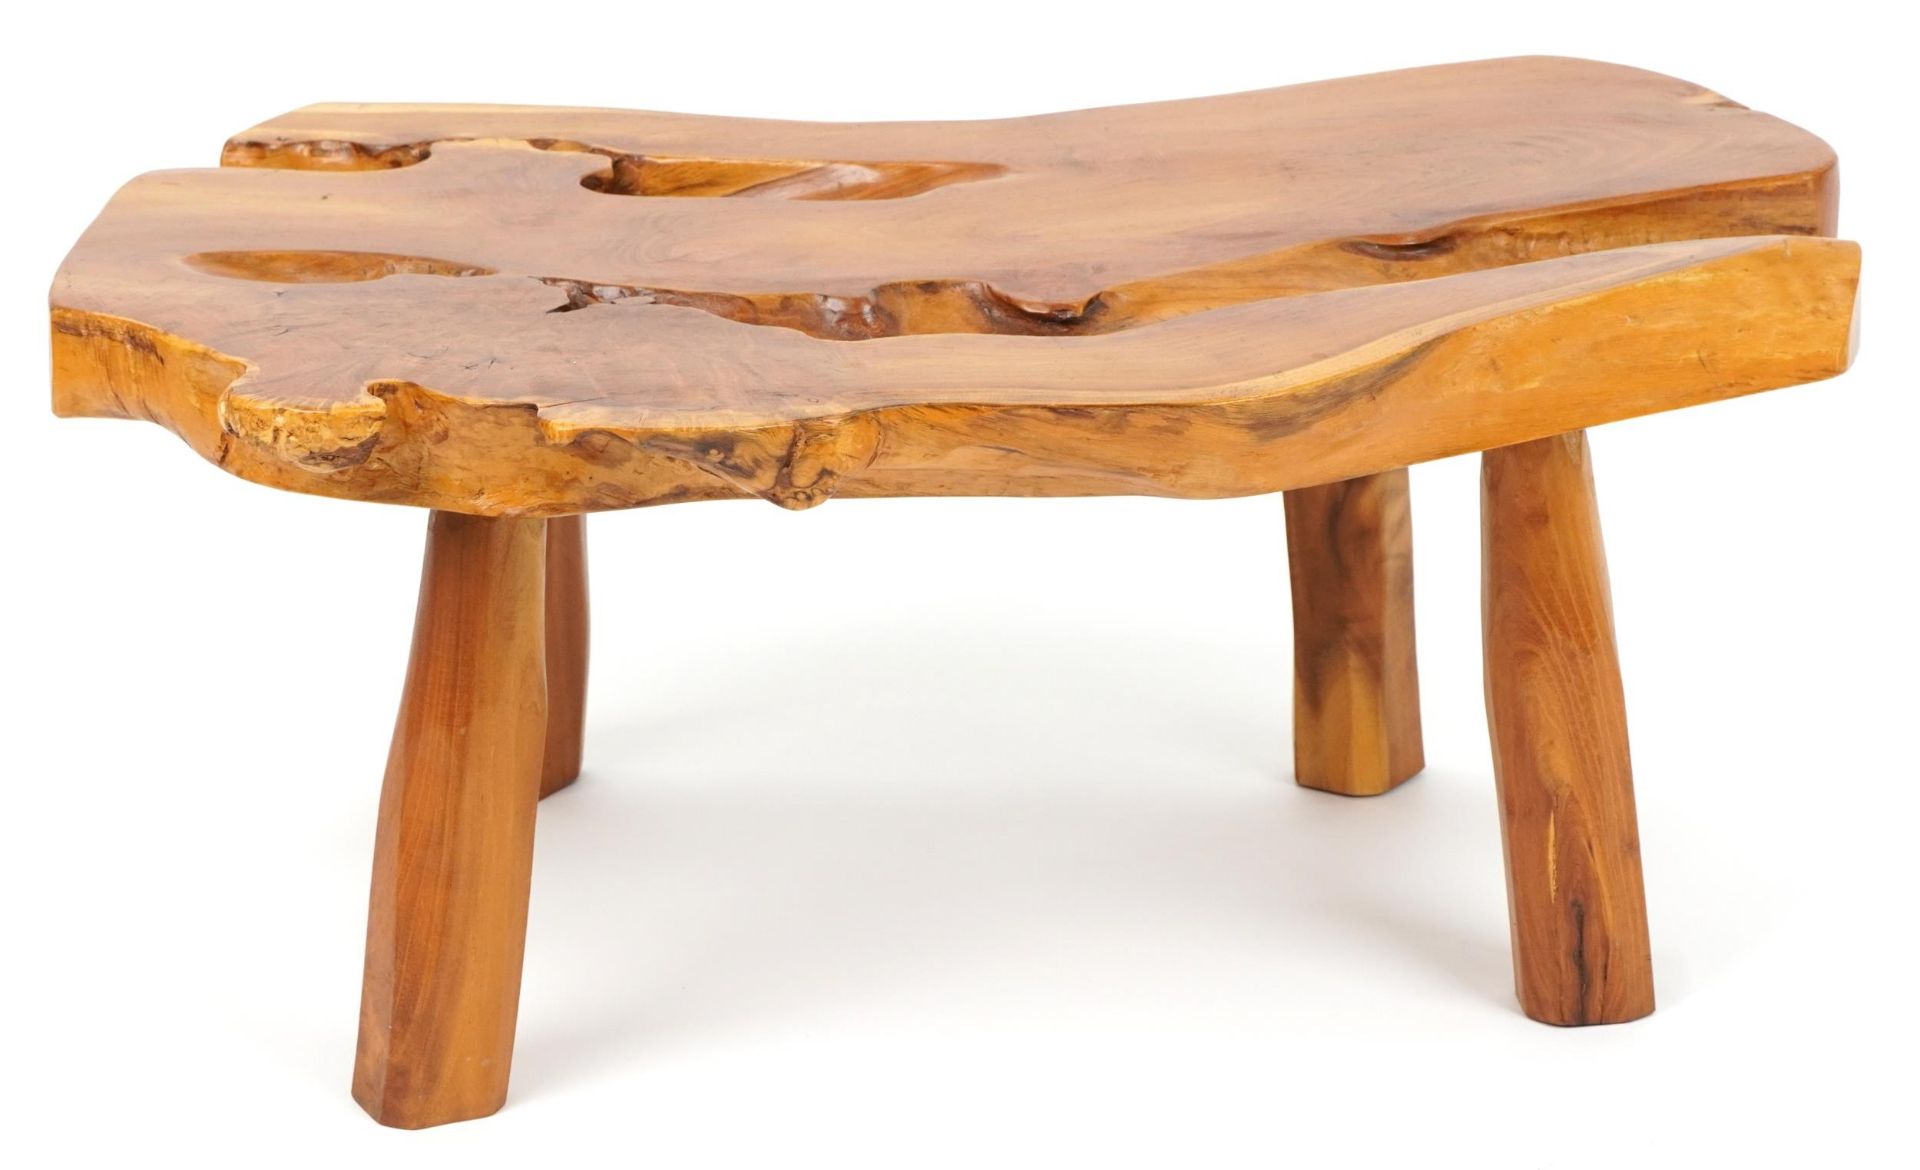 Vintage naturalistic root wood coffee table, 36.5cm H x 84cm W x 57cm D : For further information on - Image 4 of 4